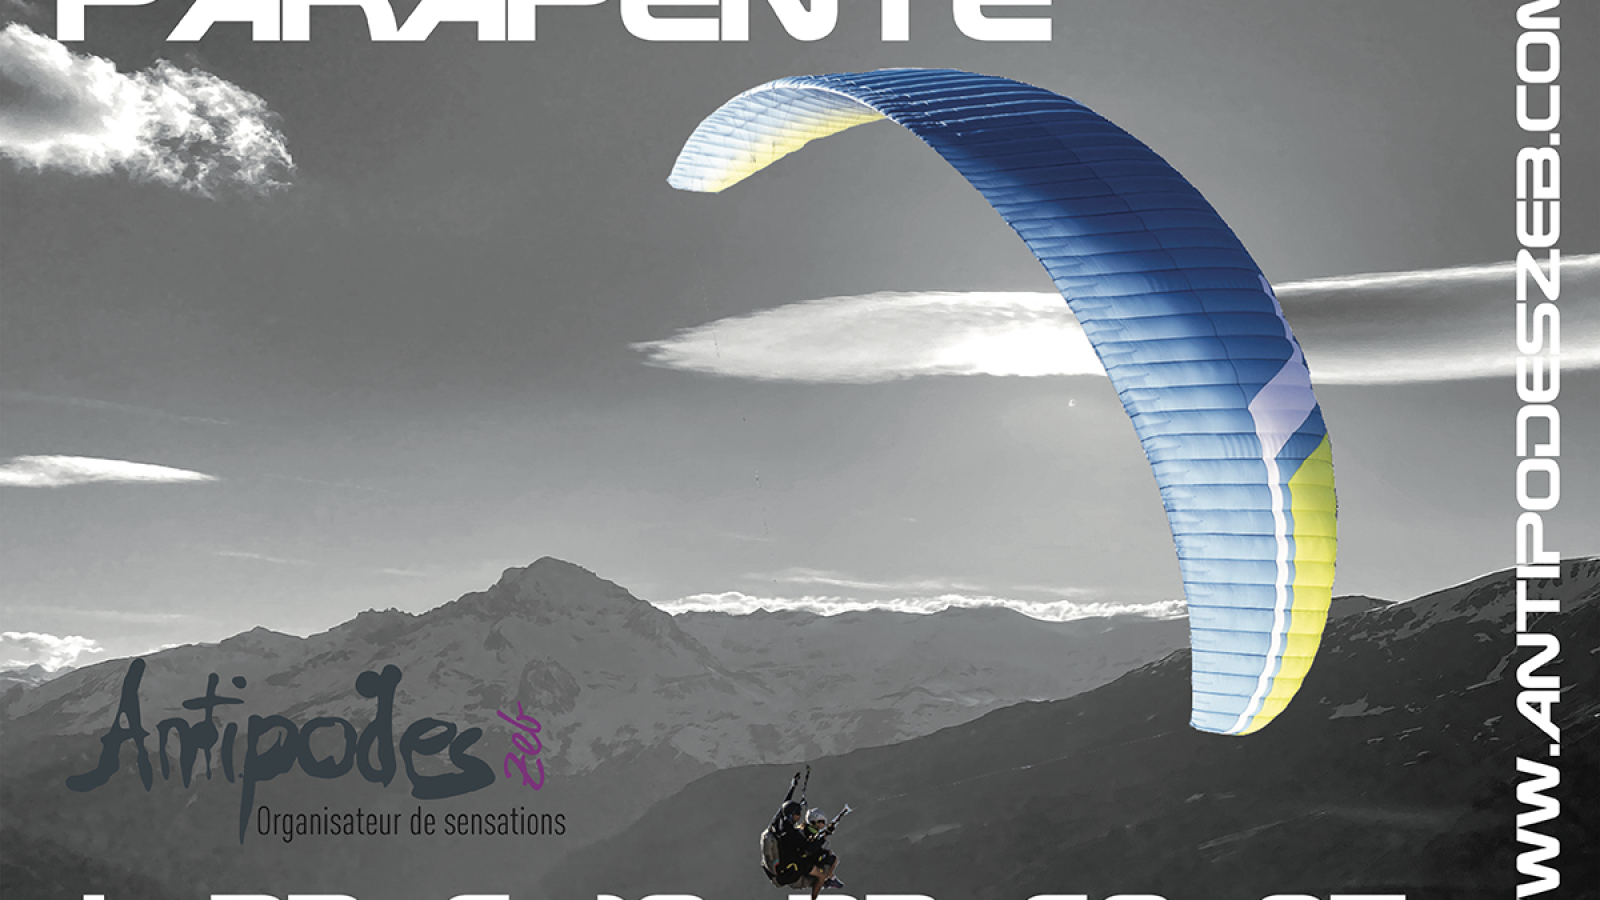 Antipodes paragliding business card